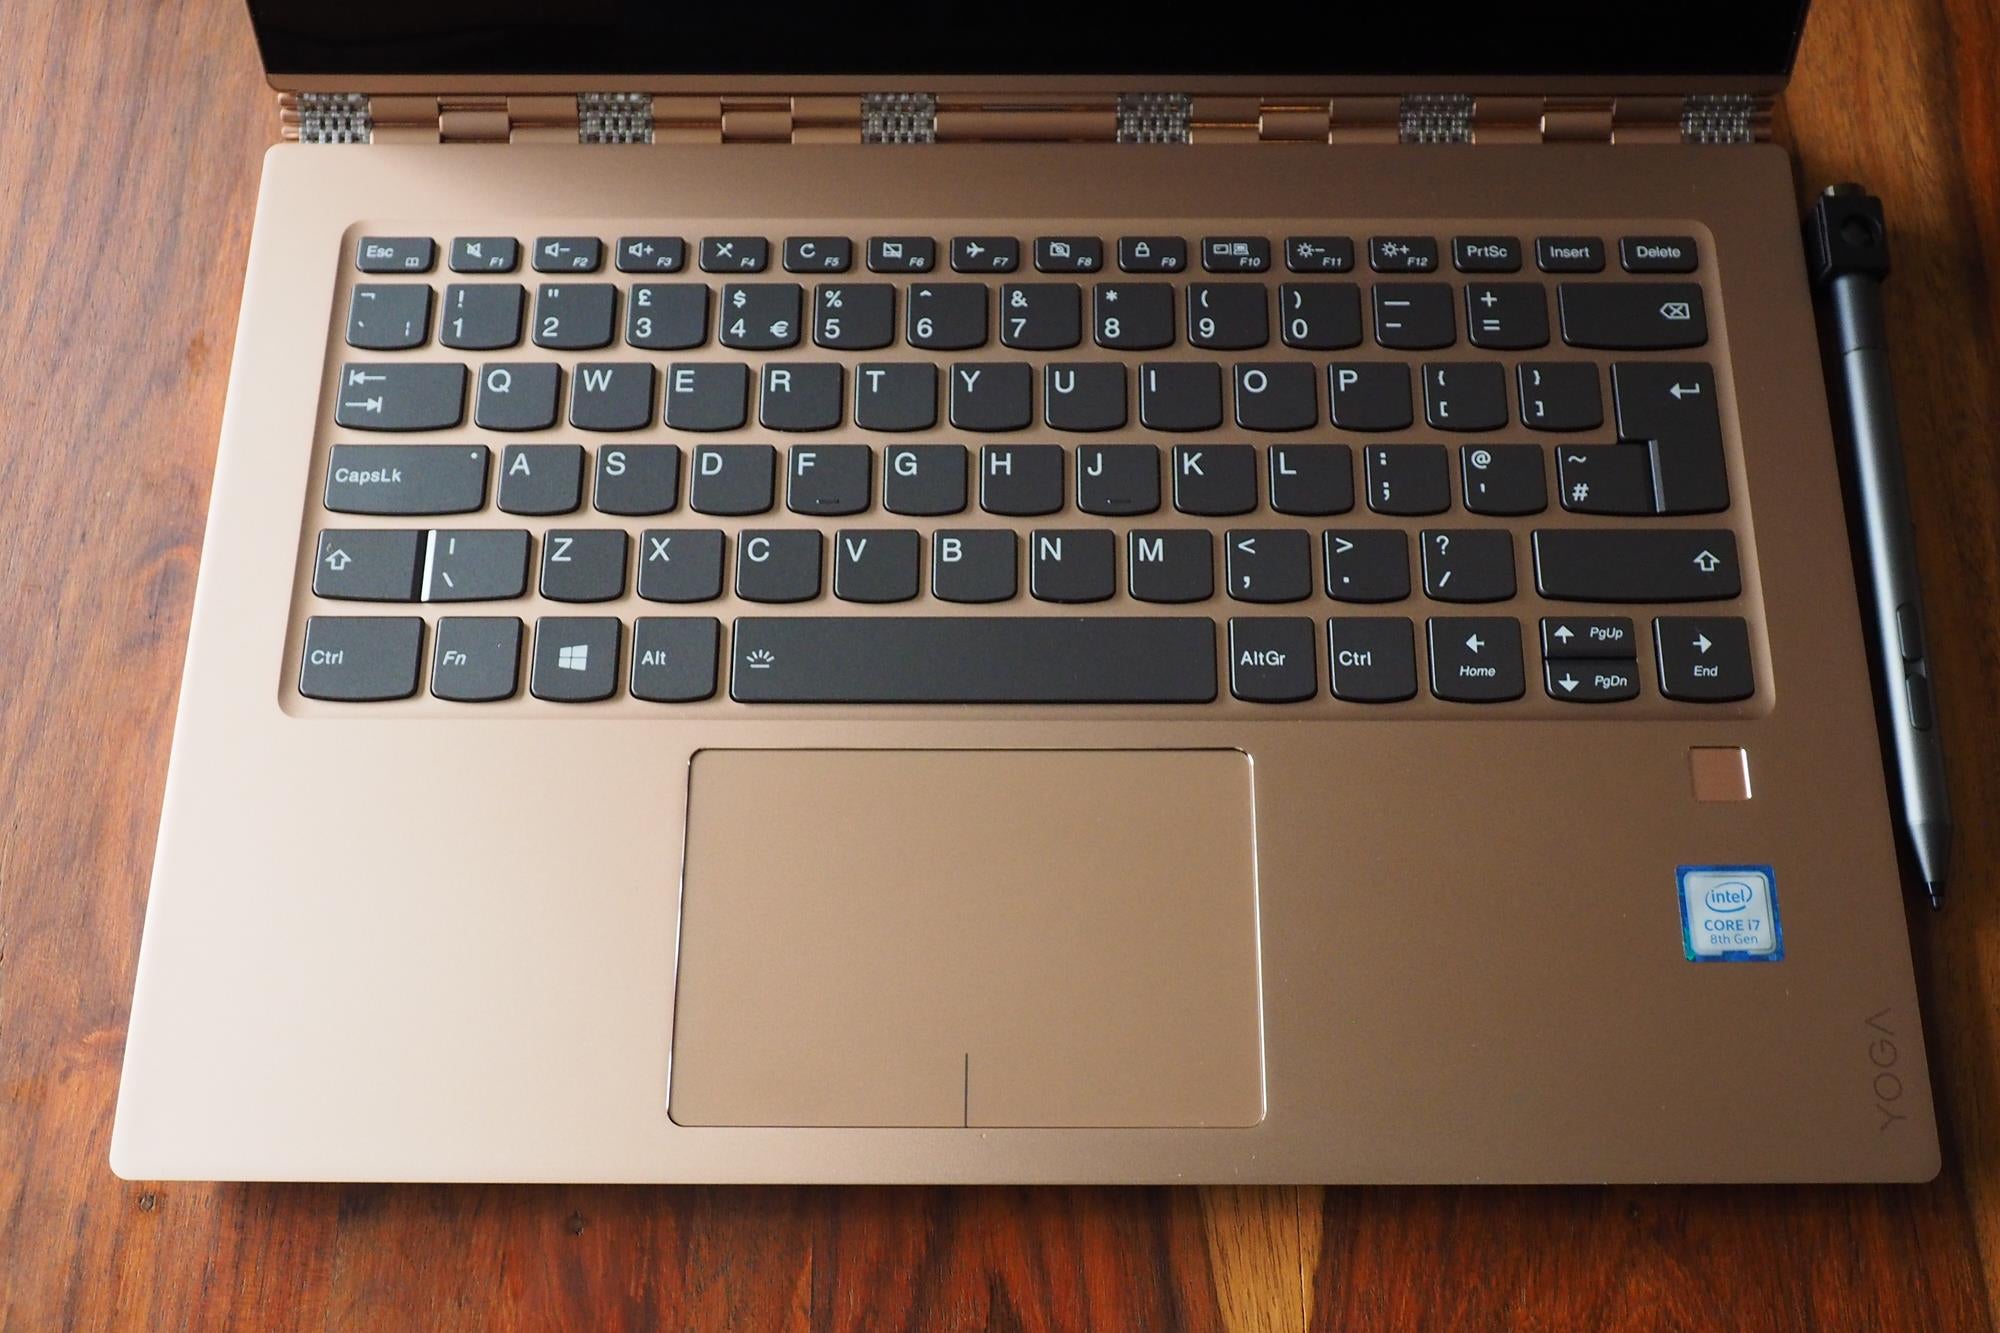 Lenovo Yoga 920 laptop with keyboard and screen visibleLenovo Yoga 920 laptop keyboard and touchpad close-up